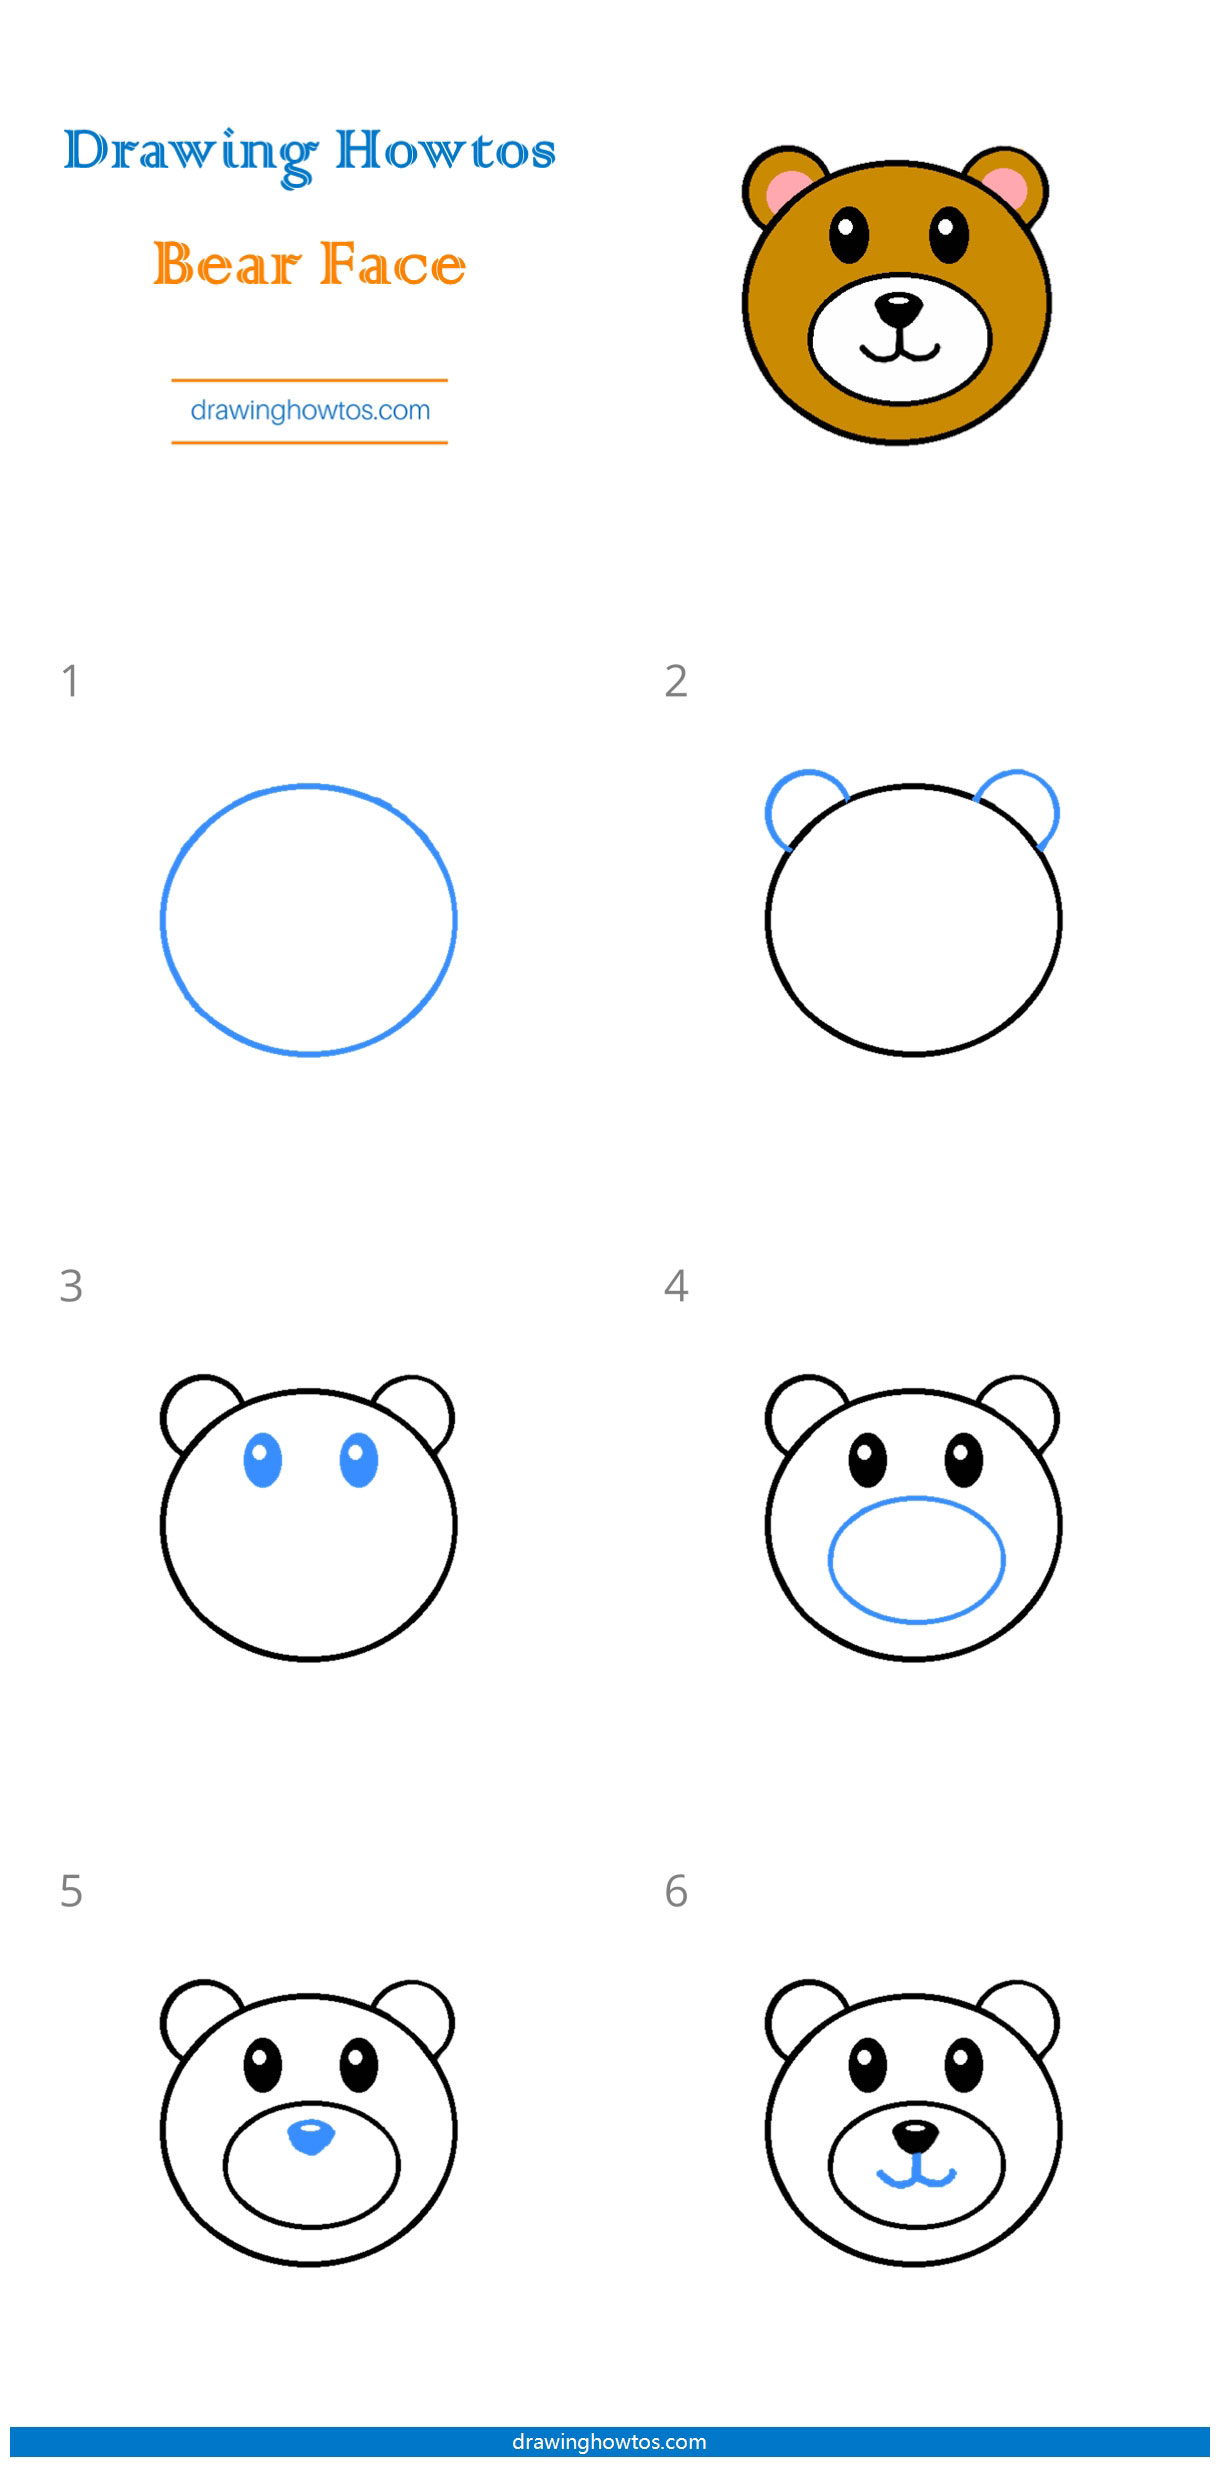 How to Draw a Bear Face Step by Step Easy Drawing Guides Drawing Howtos